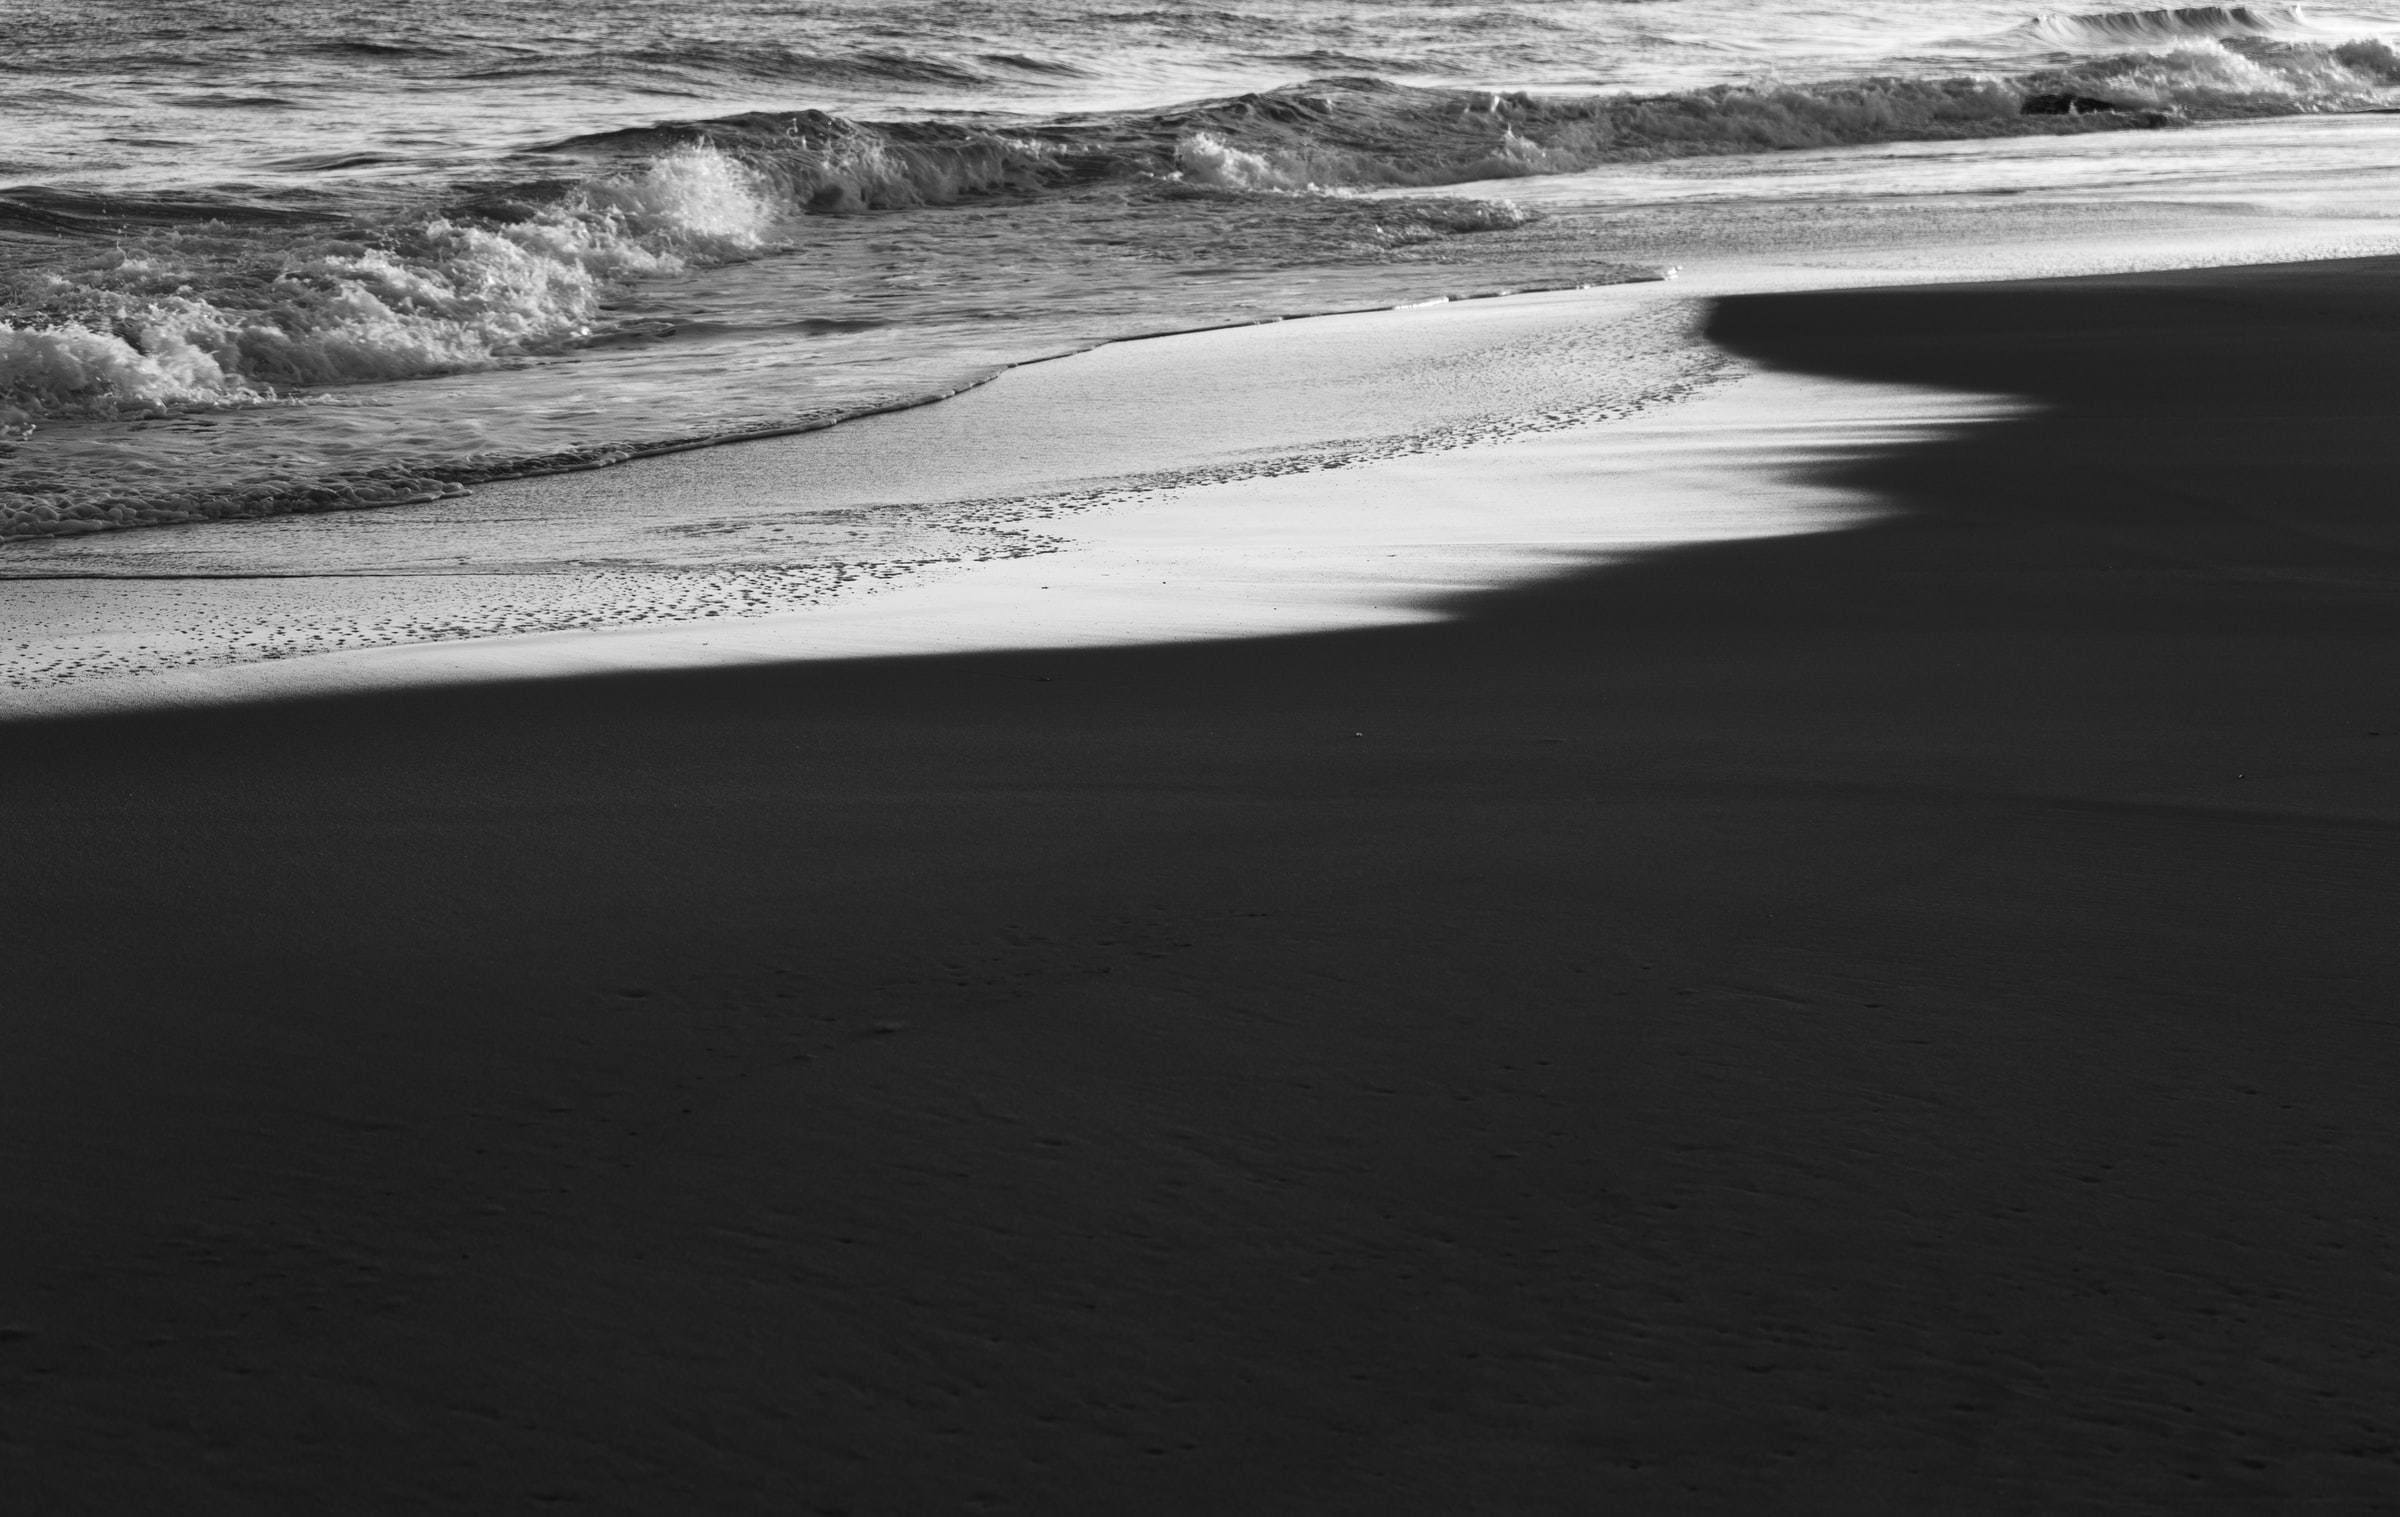 Grayscale photo of waves on a beach.